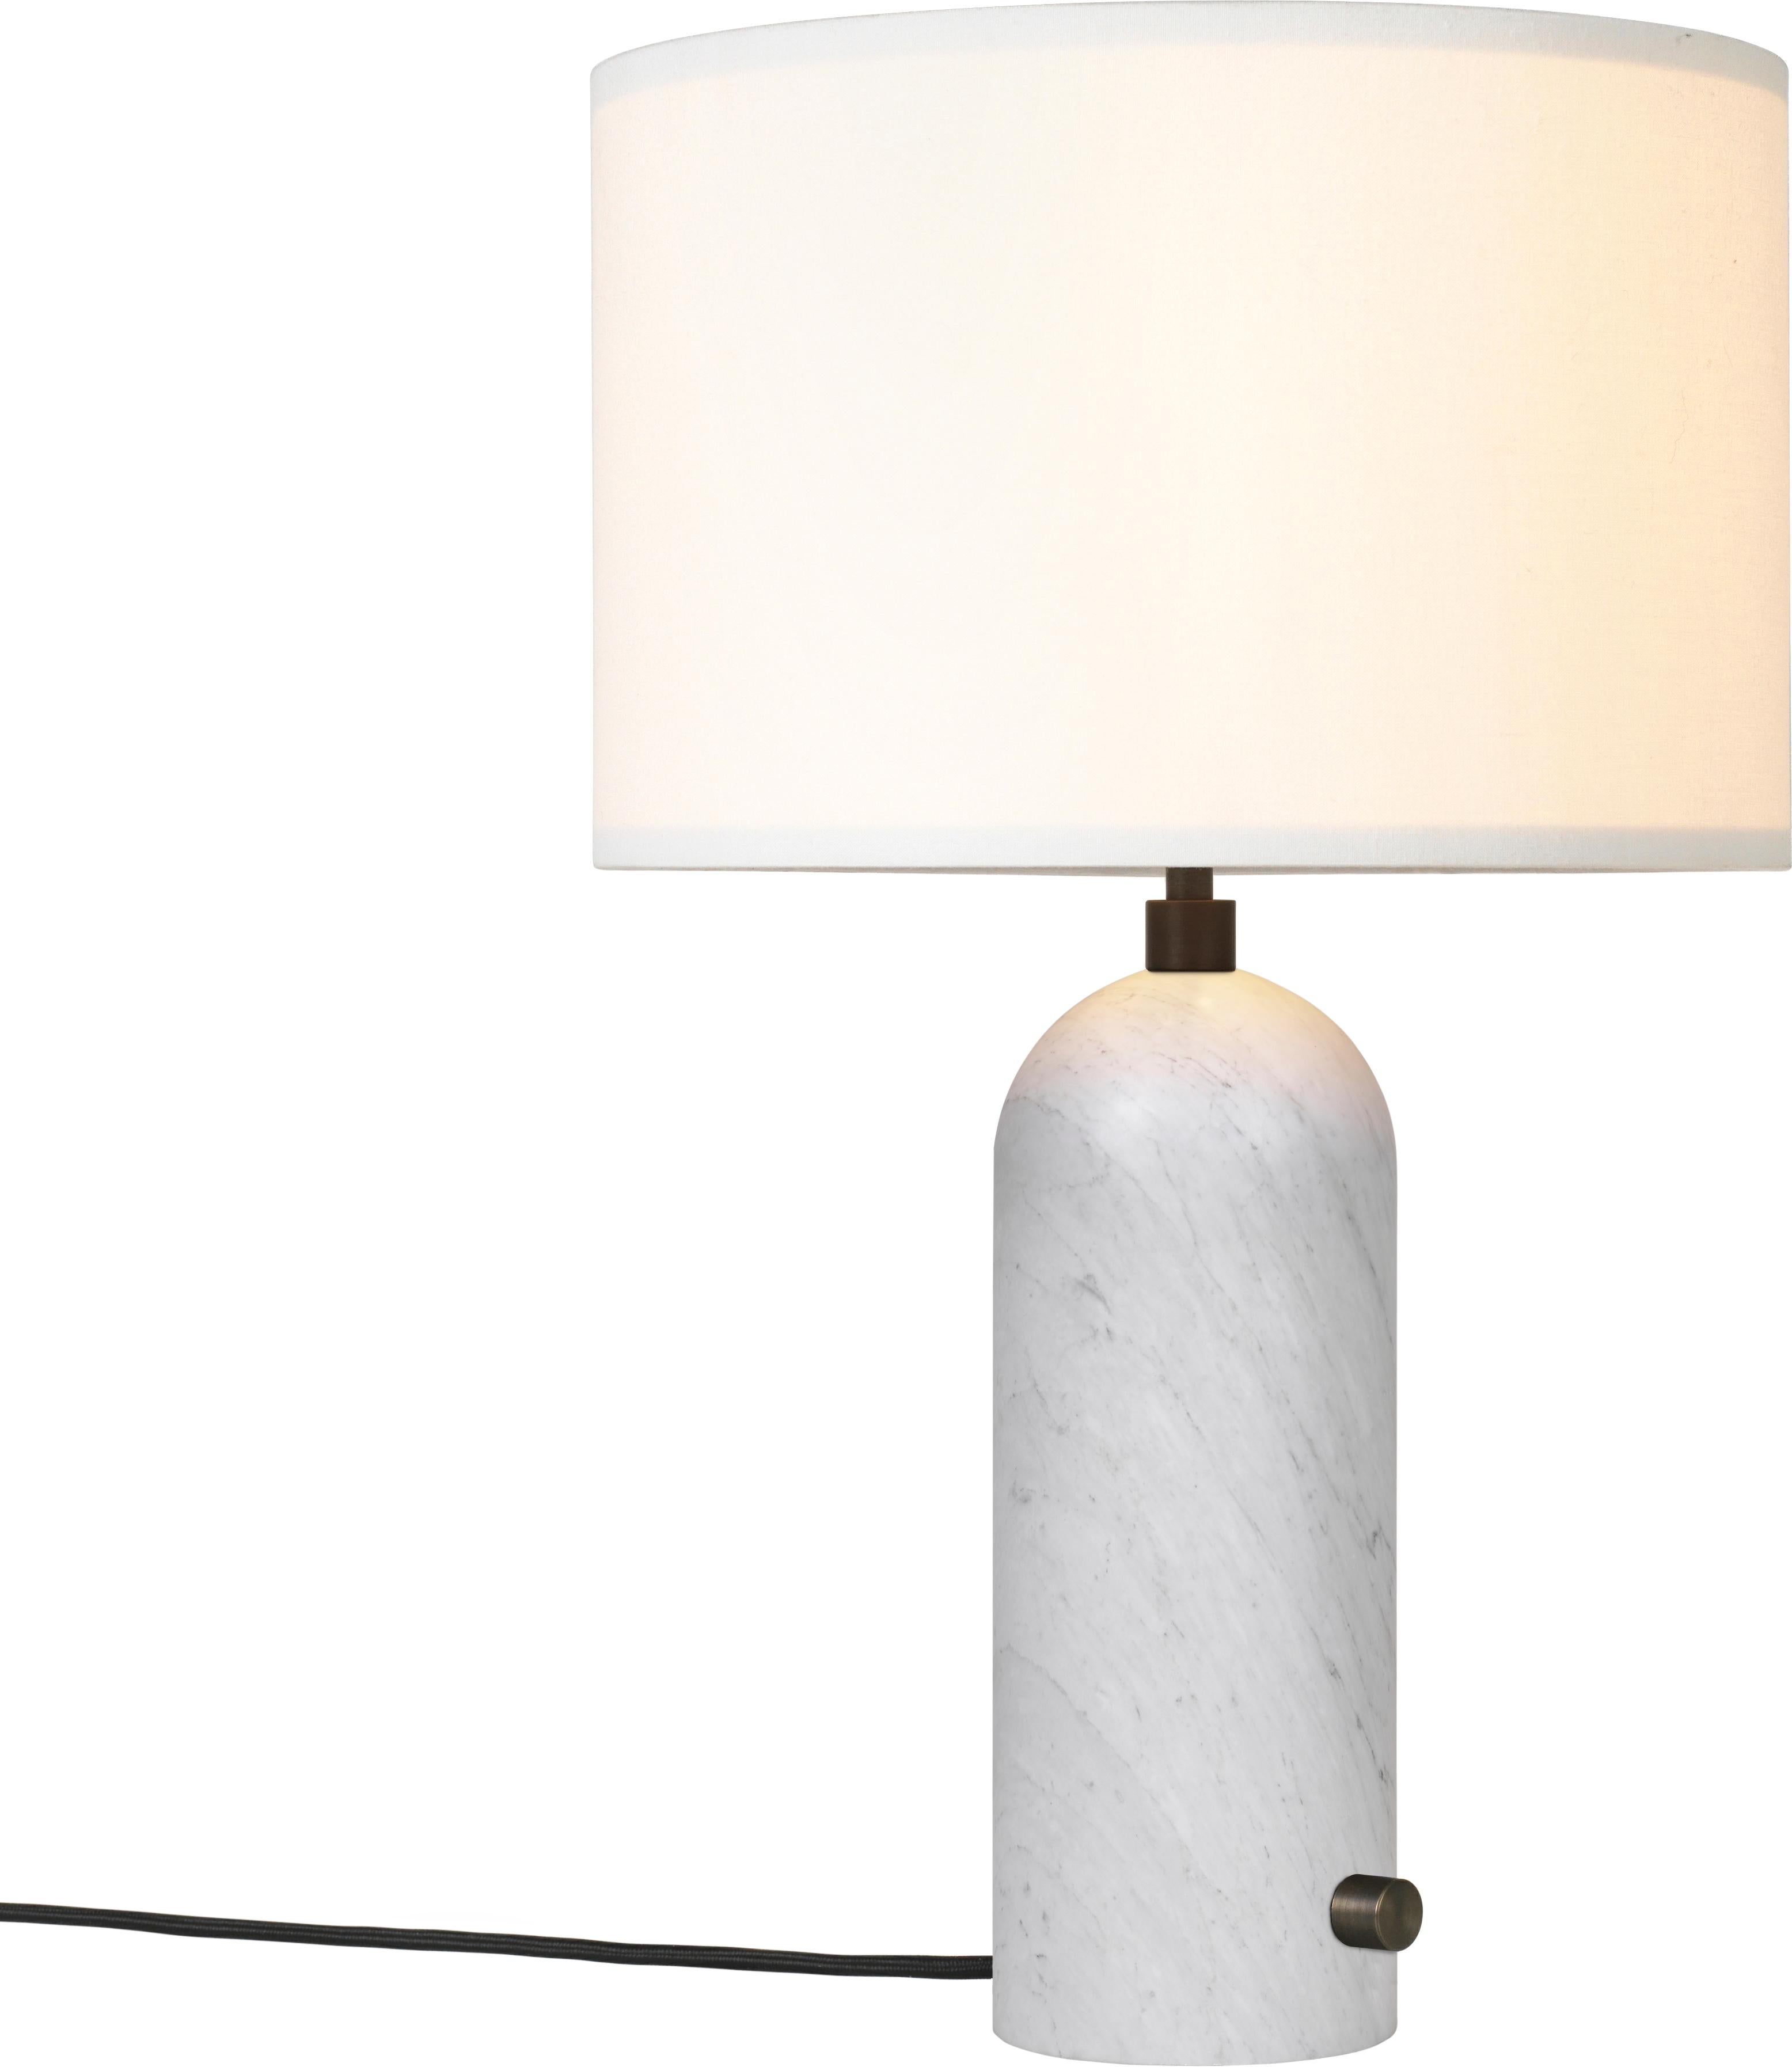 Large 'Gravity' Marble Table Lamp by Space Copenhagen for Gubi in Black For Sale 9